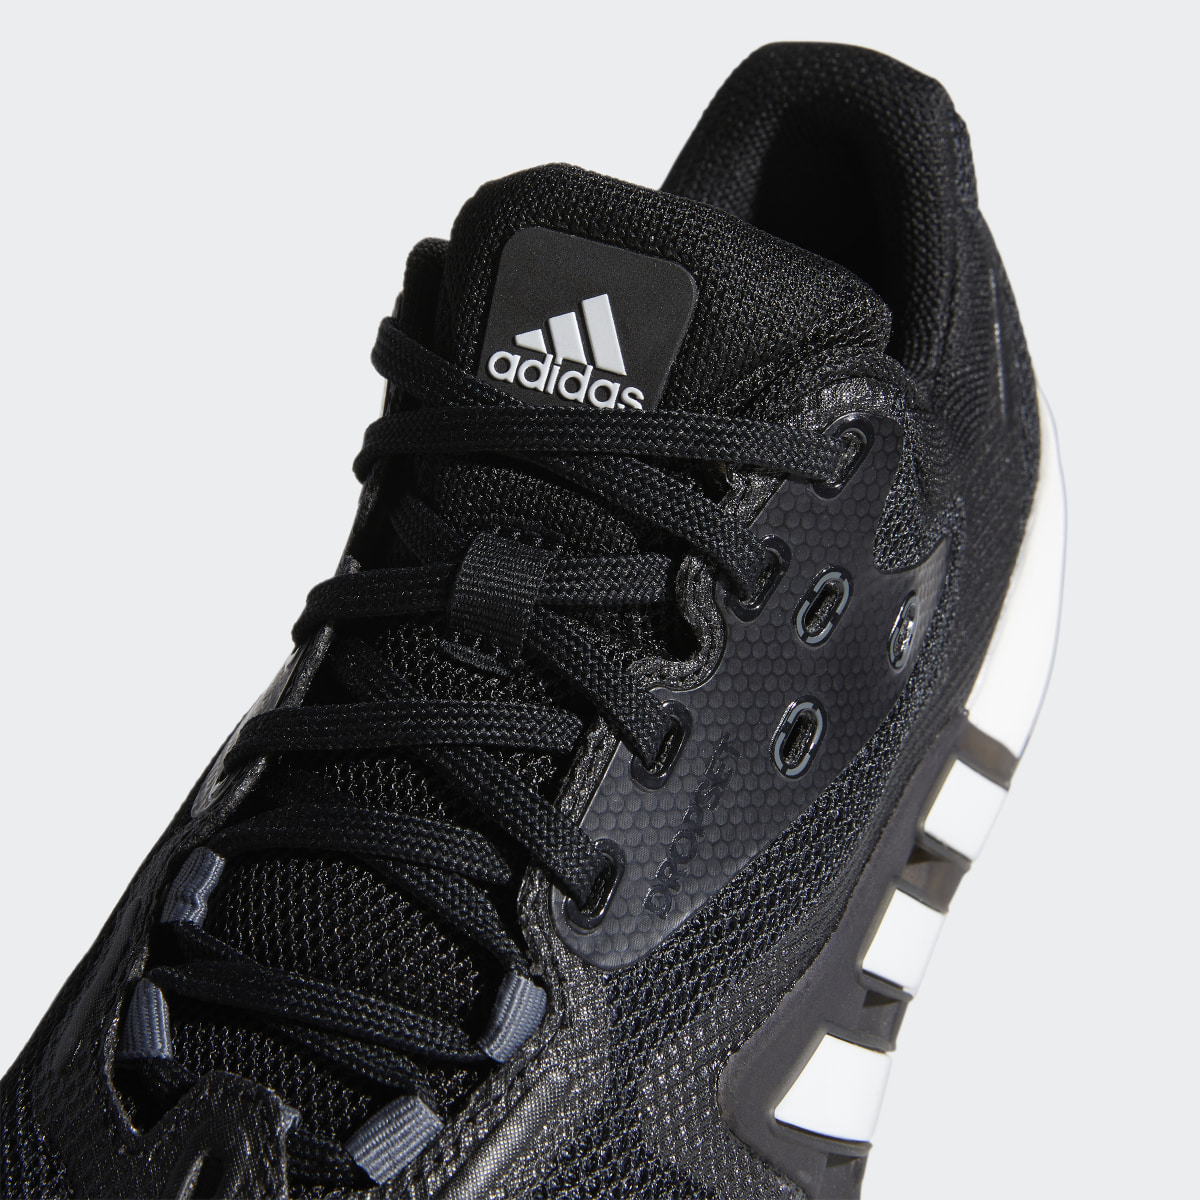 Adidas Dropset Trainers. 10